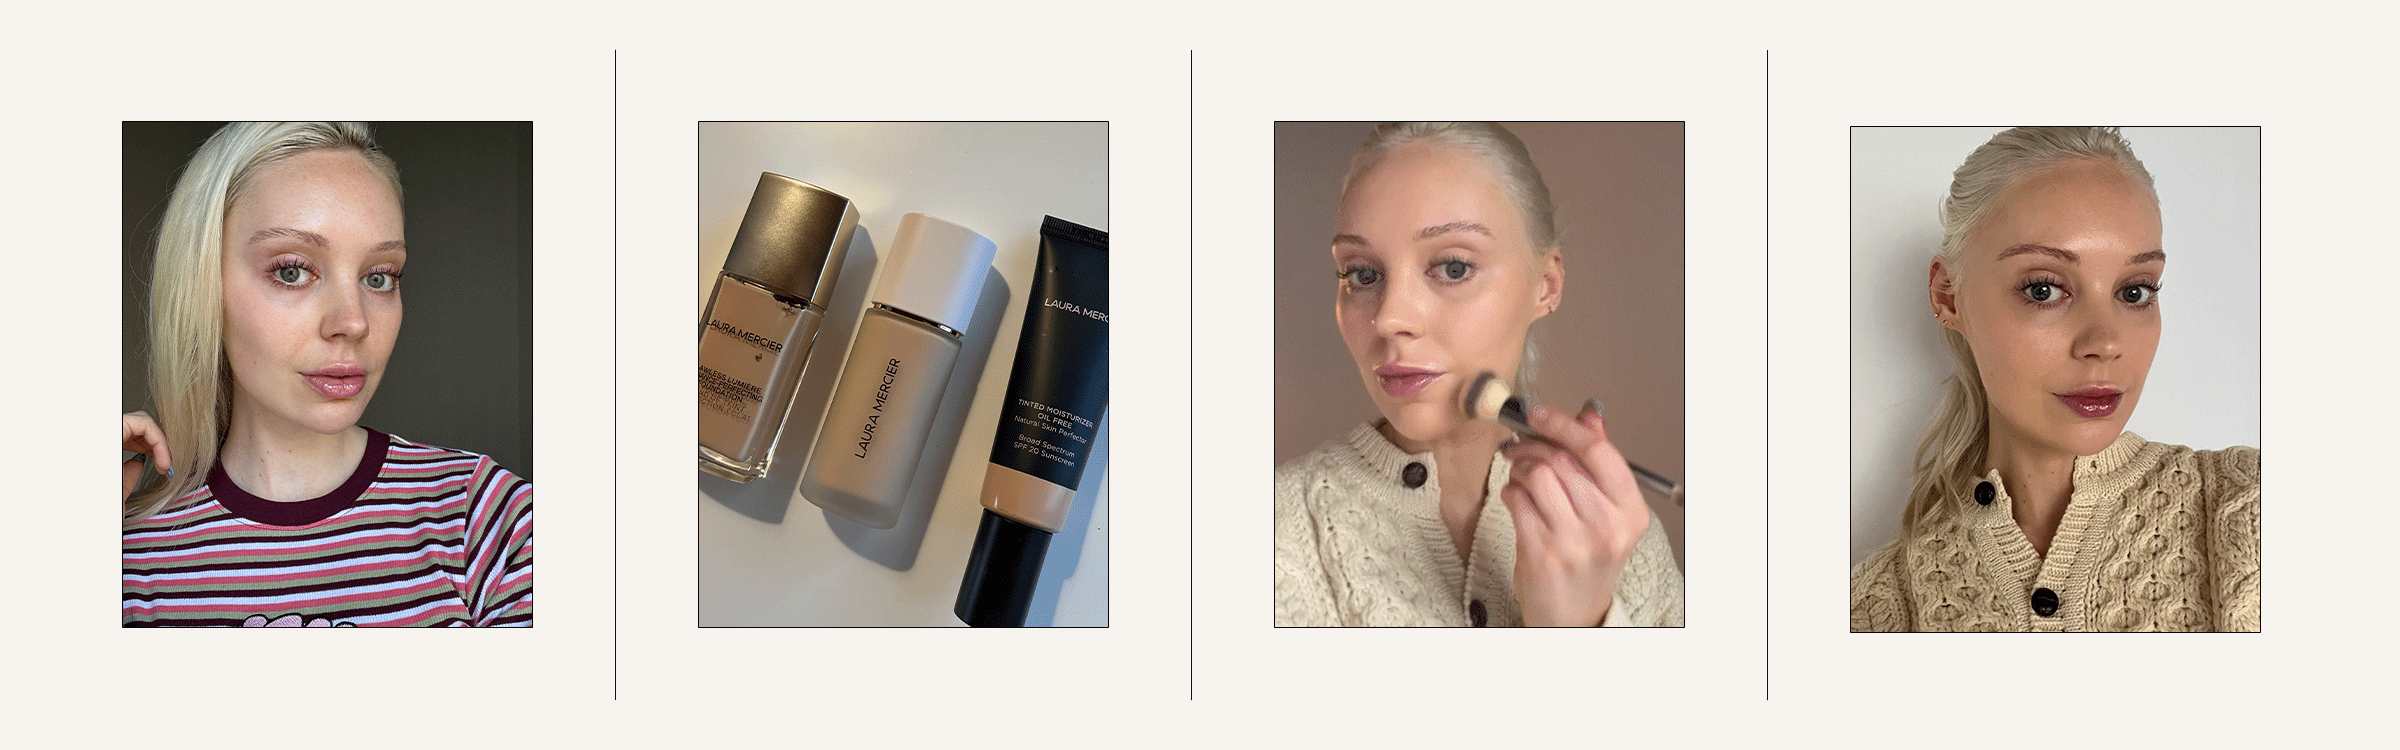 laura-mercier-real-flawless-weightless-perfecting-foundation-306187-1679072907684-square